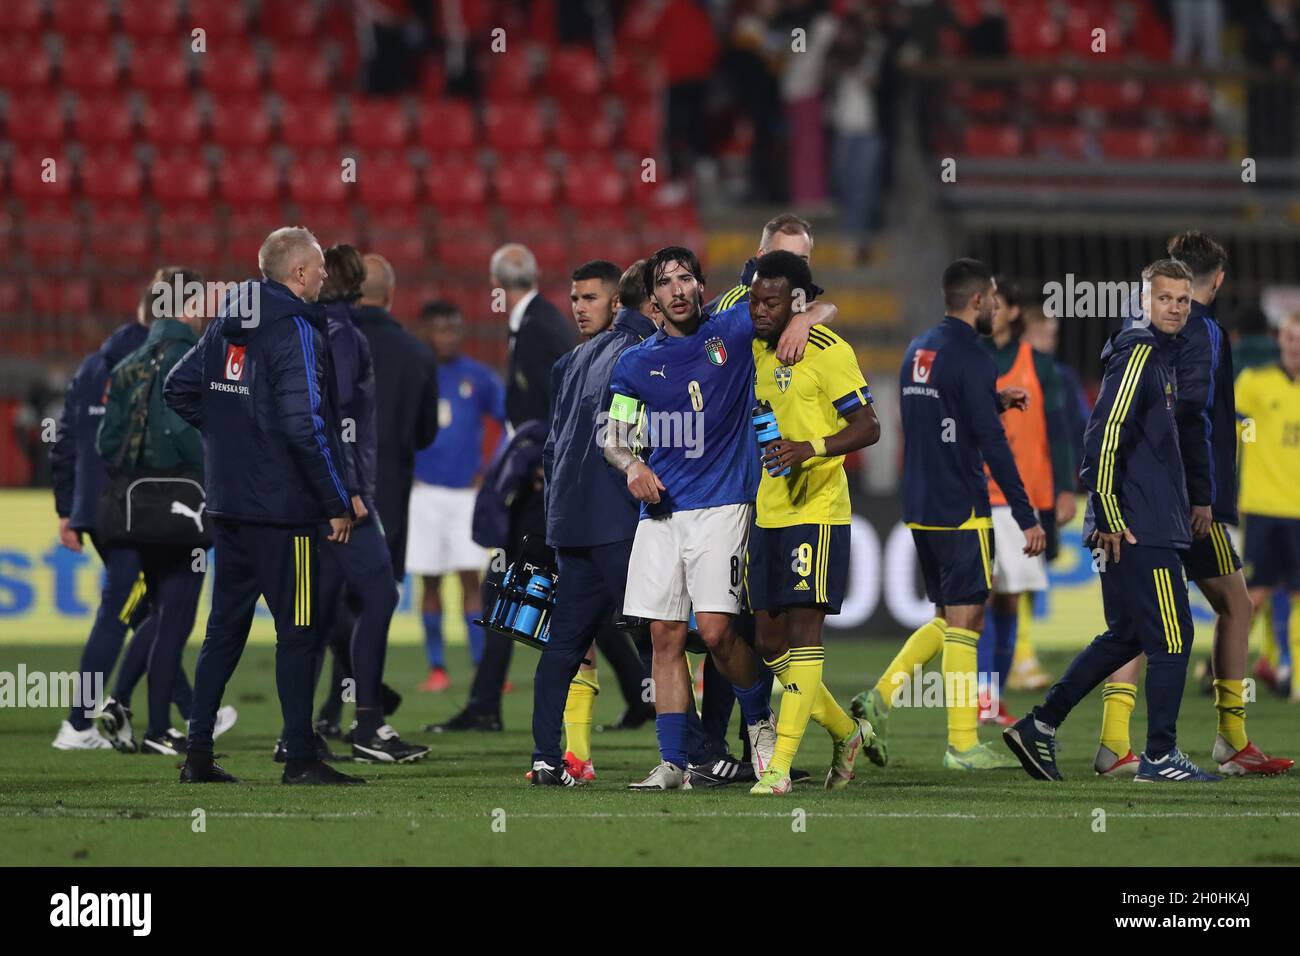 Monza, Italy. 12th Oct, 2021. Sandro Tonali of Italy discusses with Anthony Elanga of Sweden as he embraces him following the final whistle after the Swedish striker mocked the Italy fans after his team mate Tim Prica scored a last minute equalizer in the UEFA Euro Under-21 Qualifying match at Stadio Brianteo, Monza. Picture credit should read: Jonathan Moscrop/Sportimage Credit: Sportimage/Alamy Live News Stock Photo